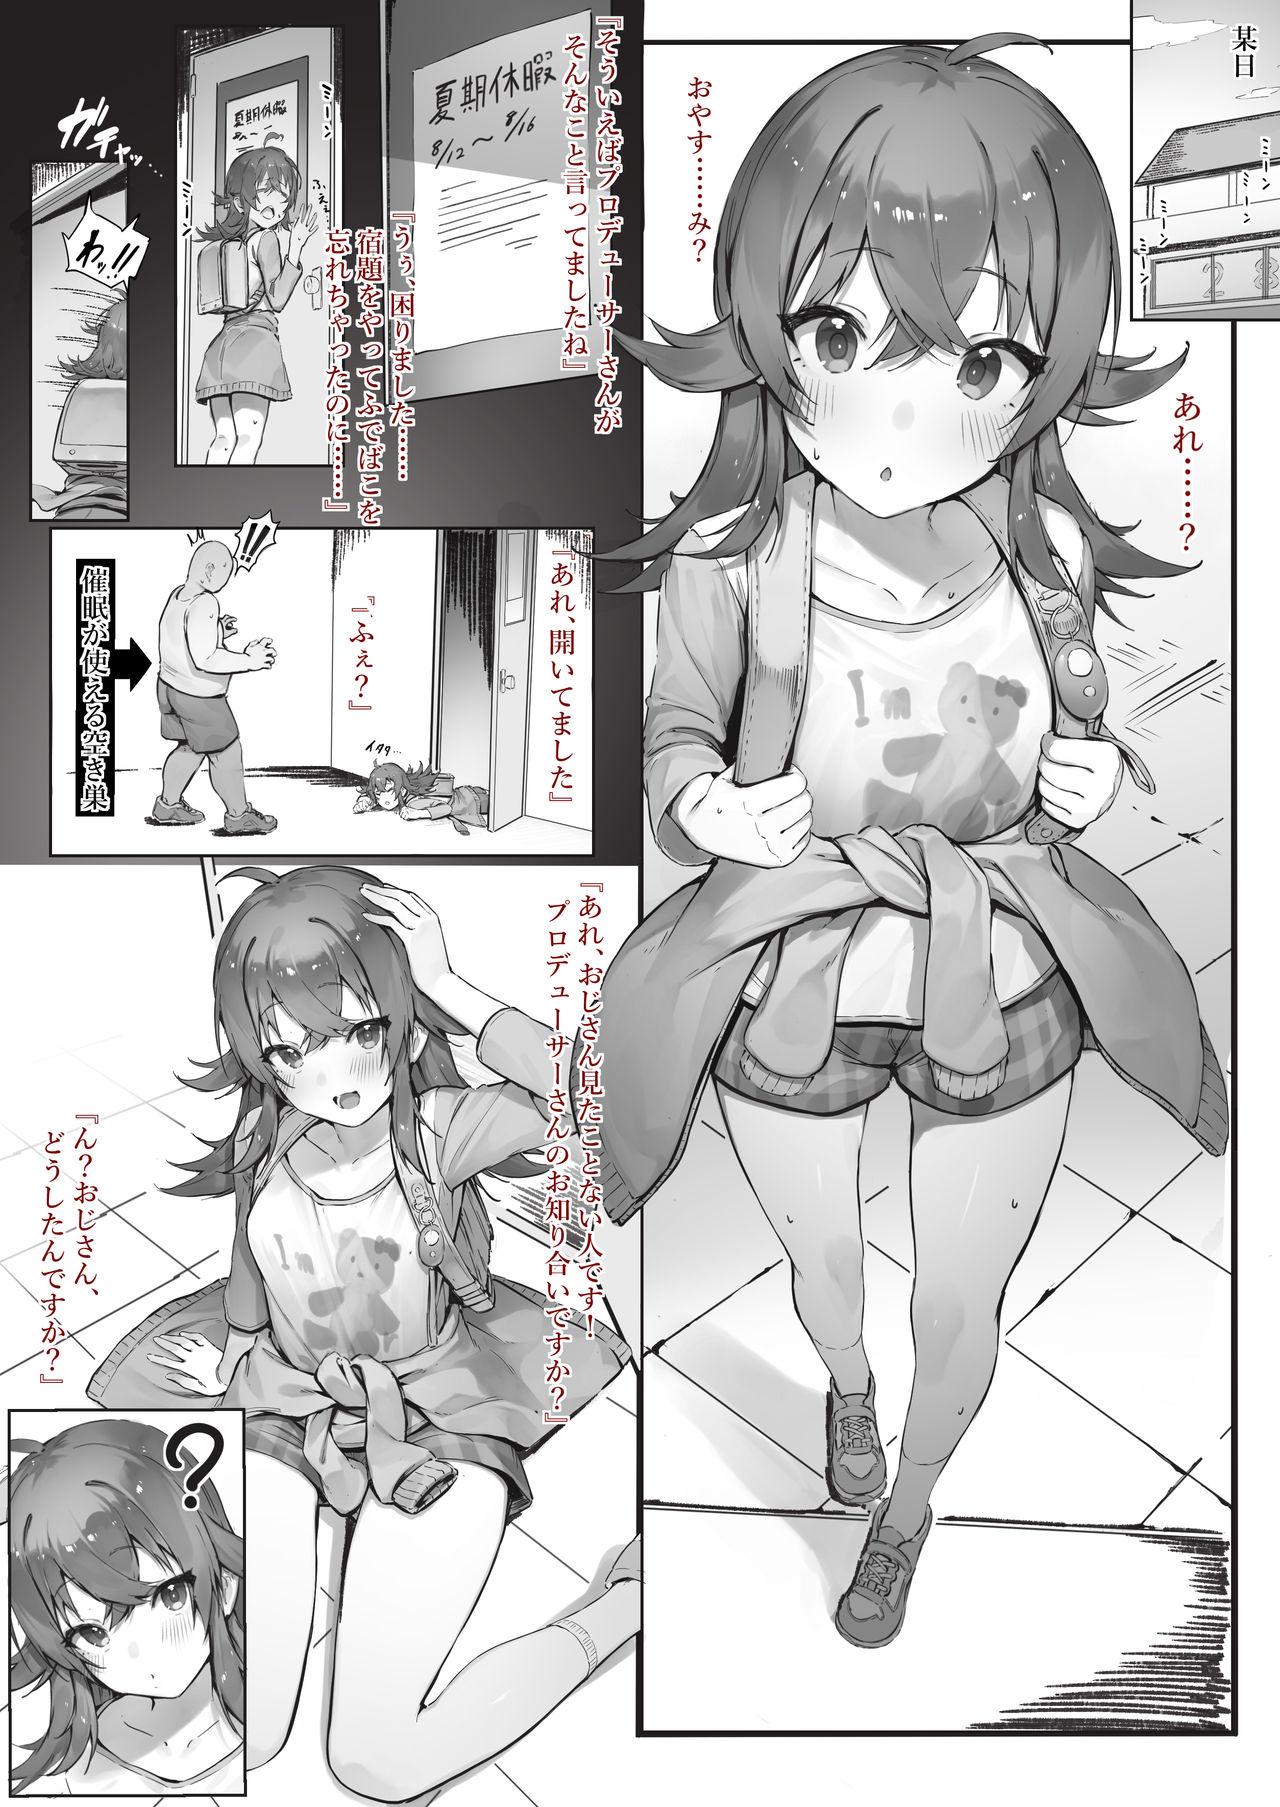 Shaven shinycolors collection - The idolmaster Swallow - Page 9